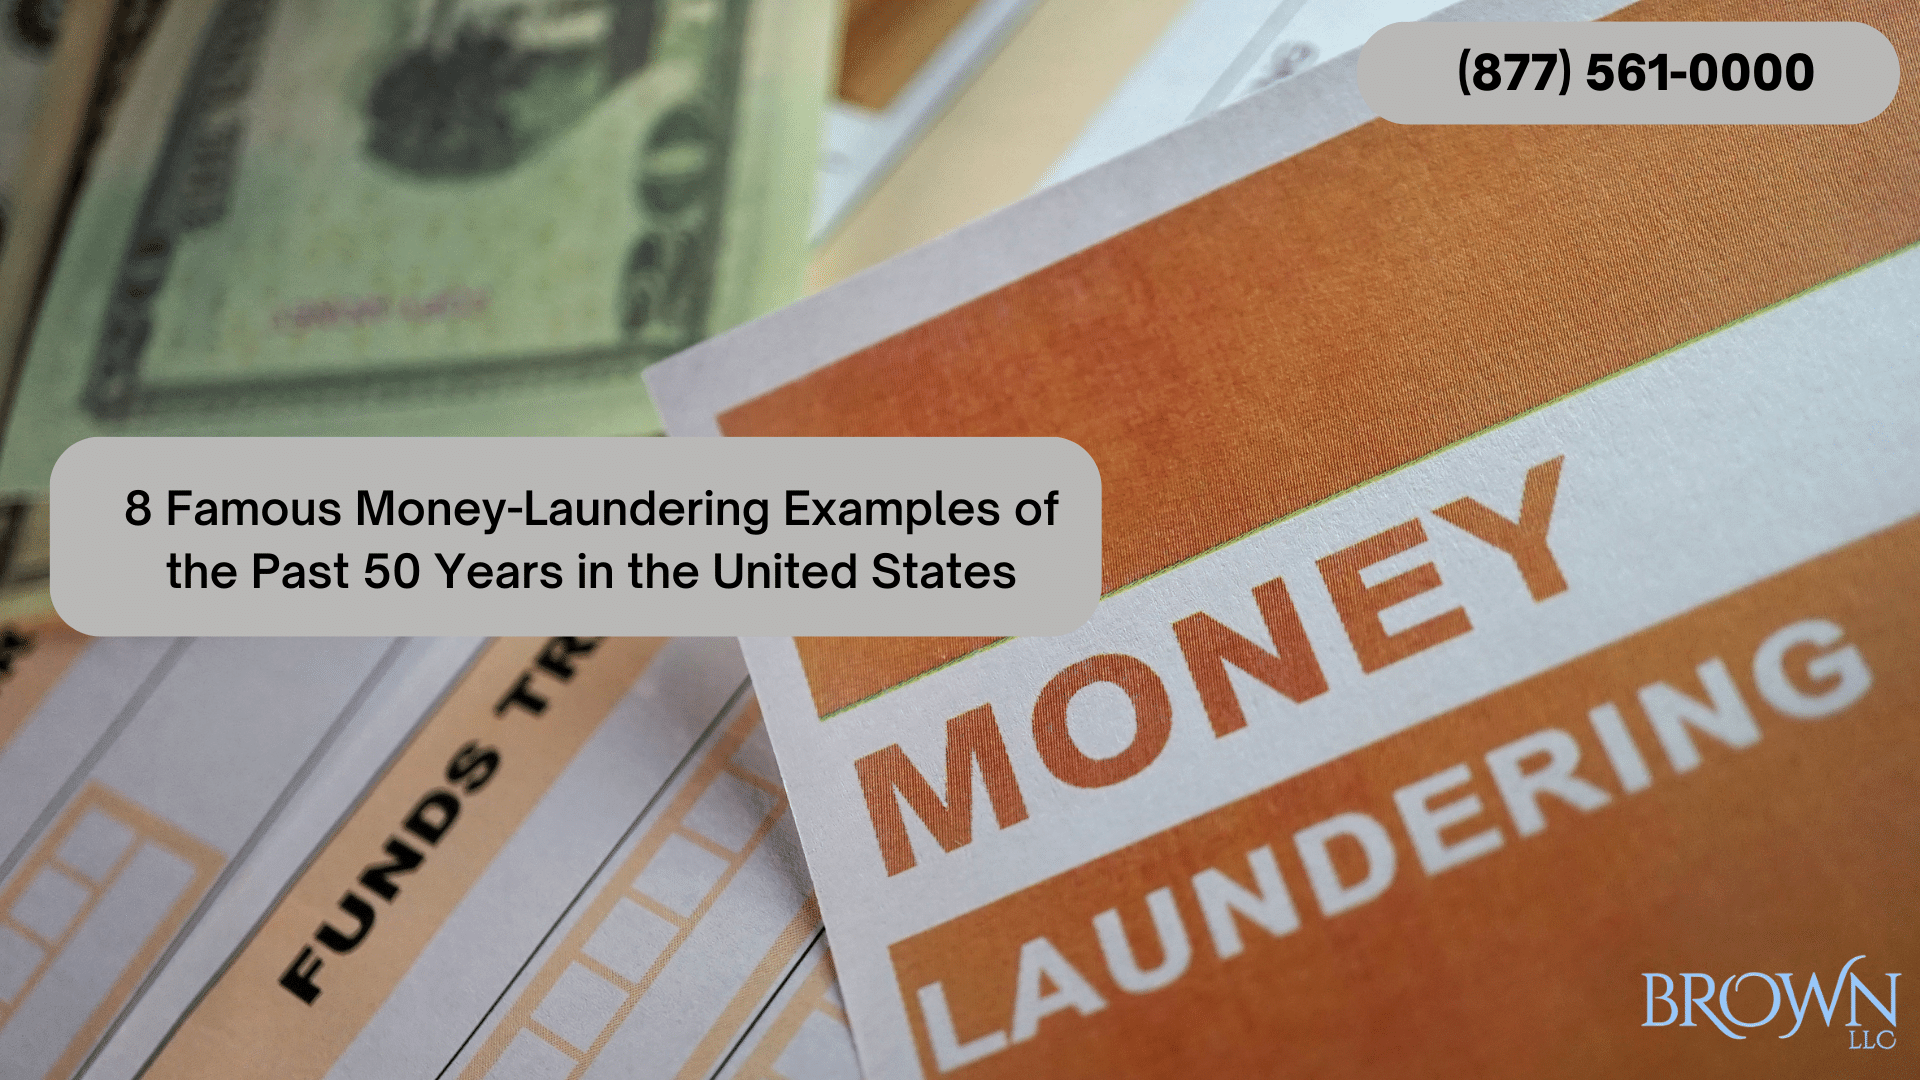 8 Famous Money-Laundering Examples of the Past 50 Years in the United States